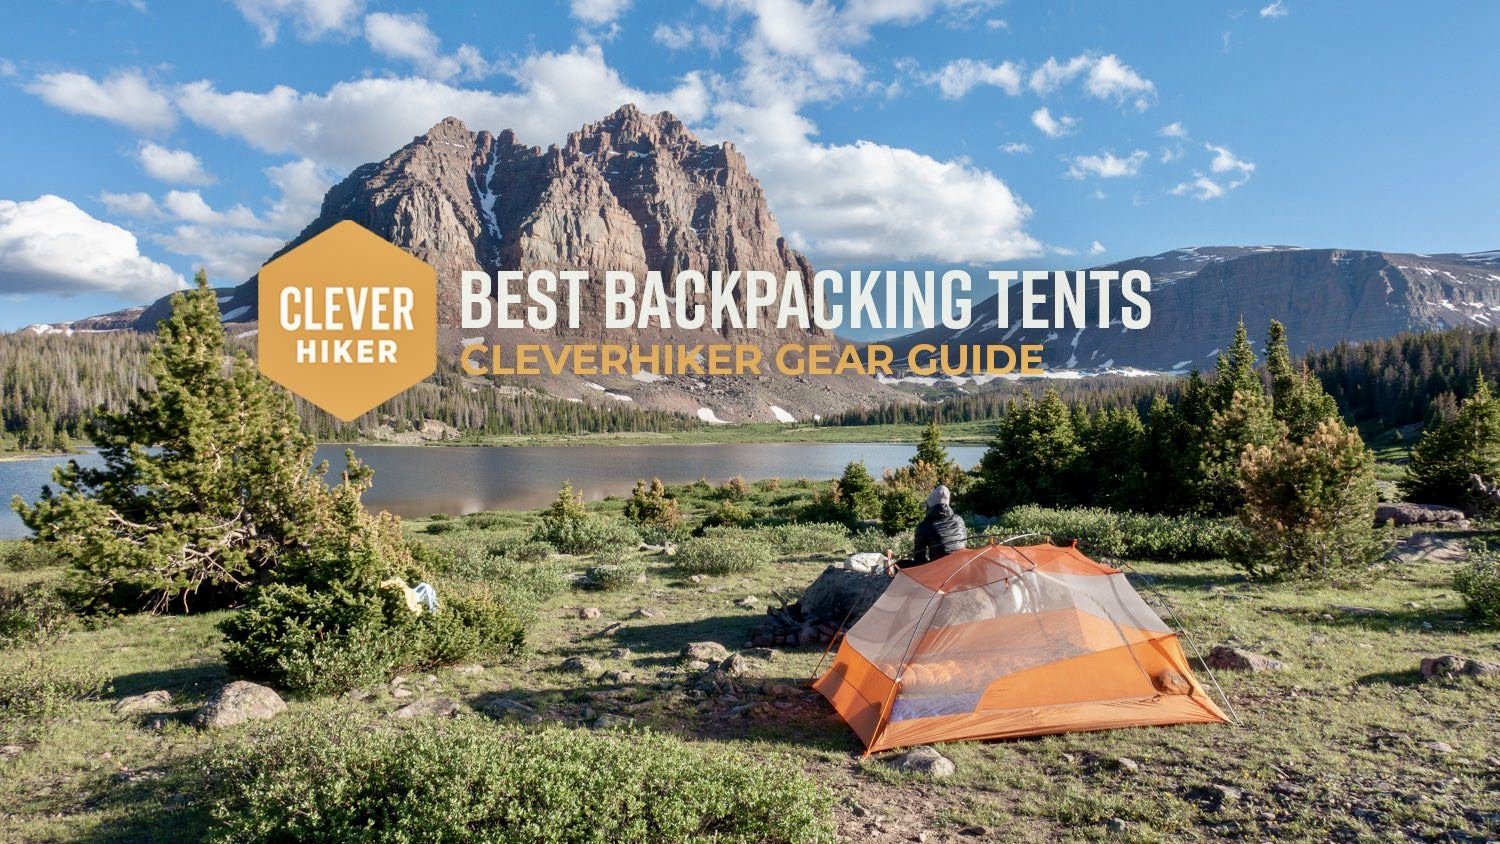 best backpacking tents title shot tent by a lake in the mountains